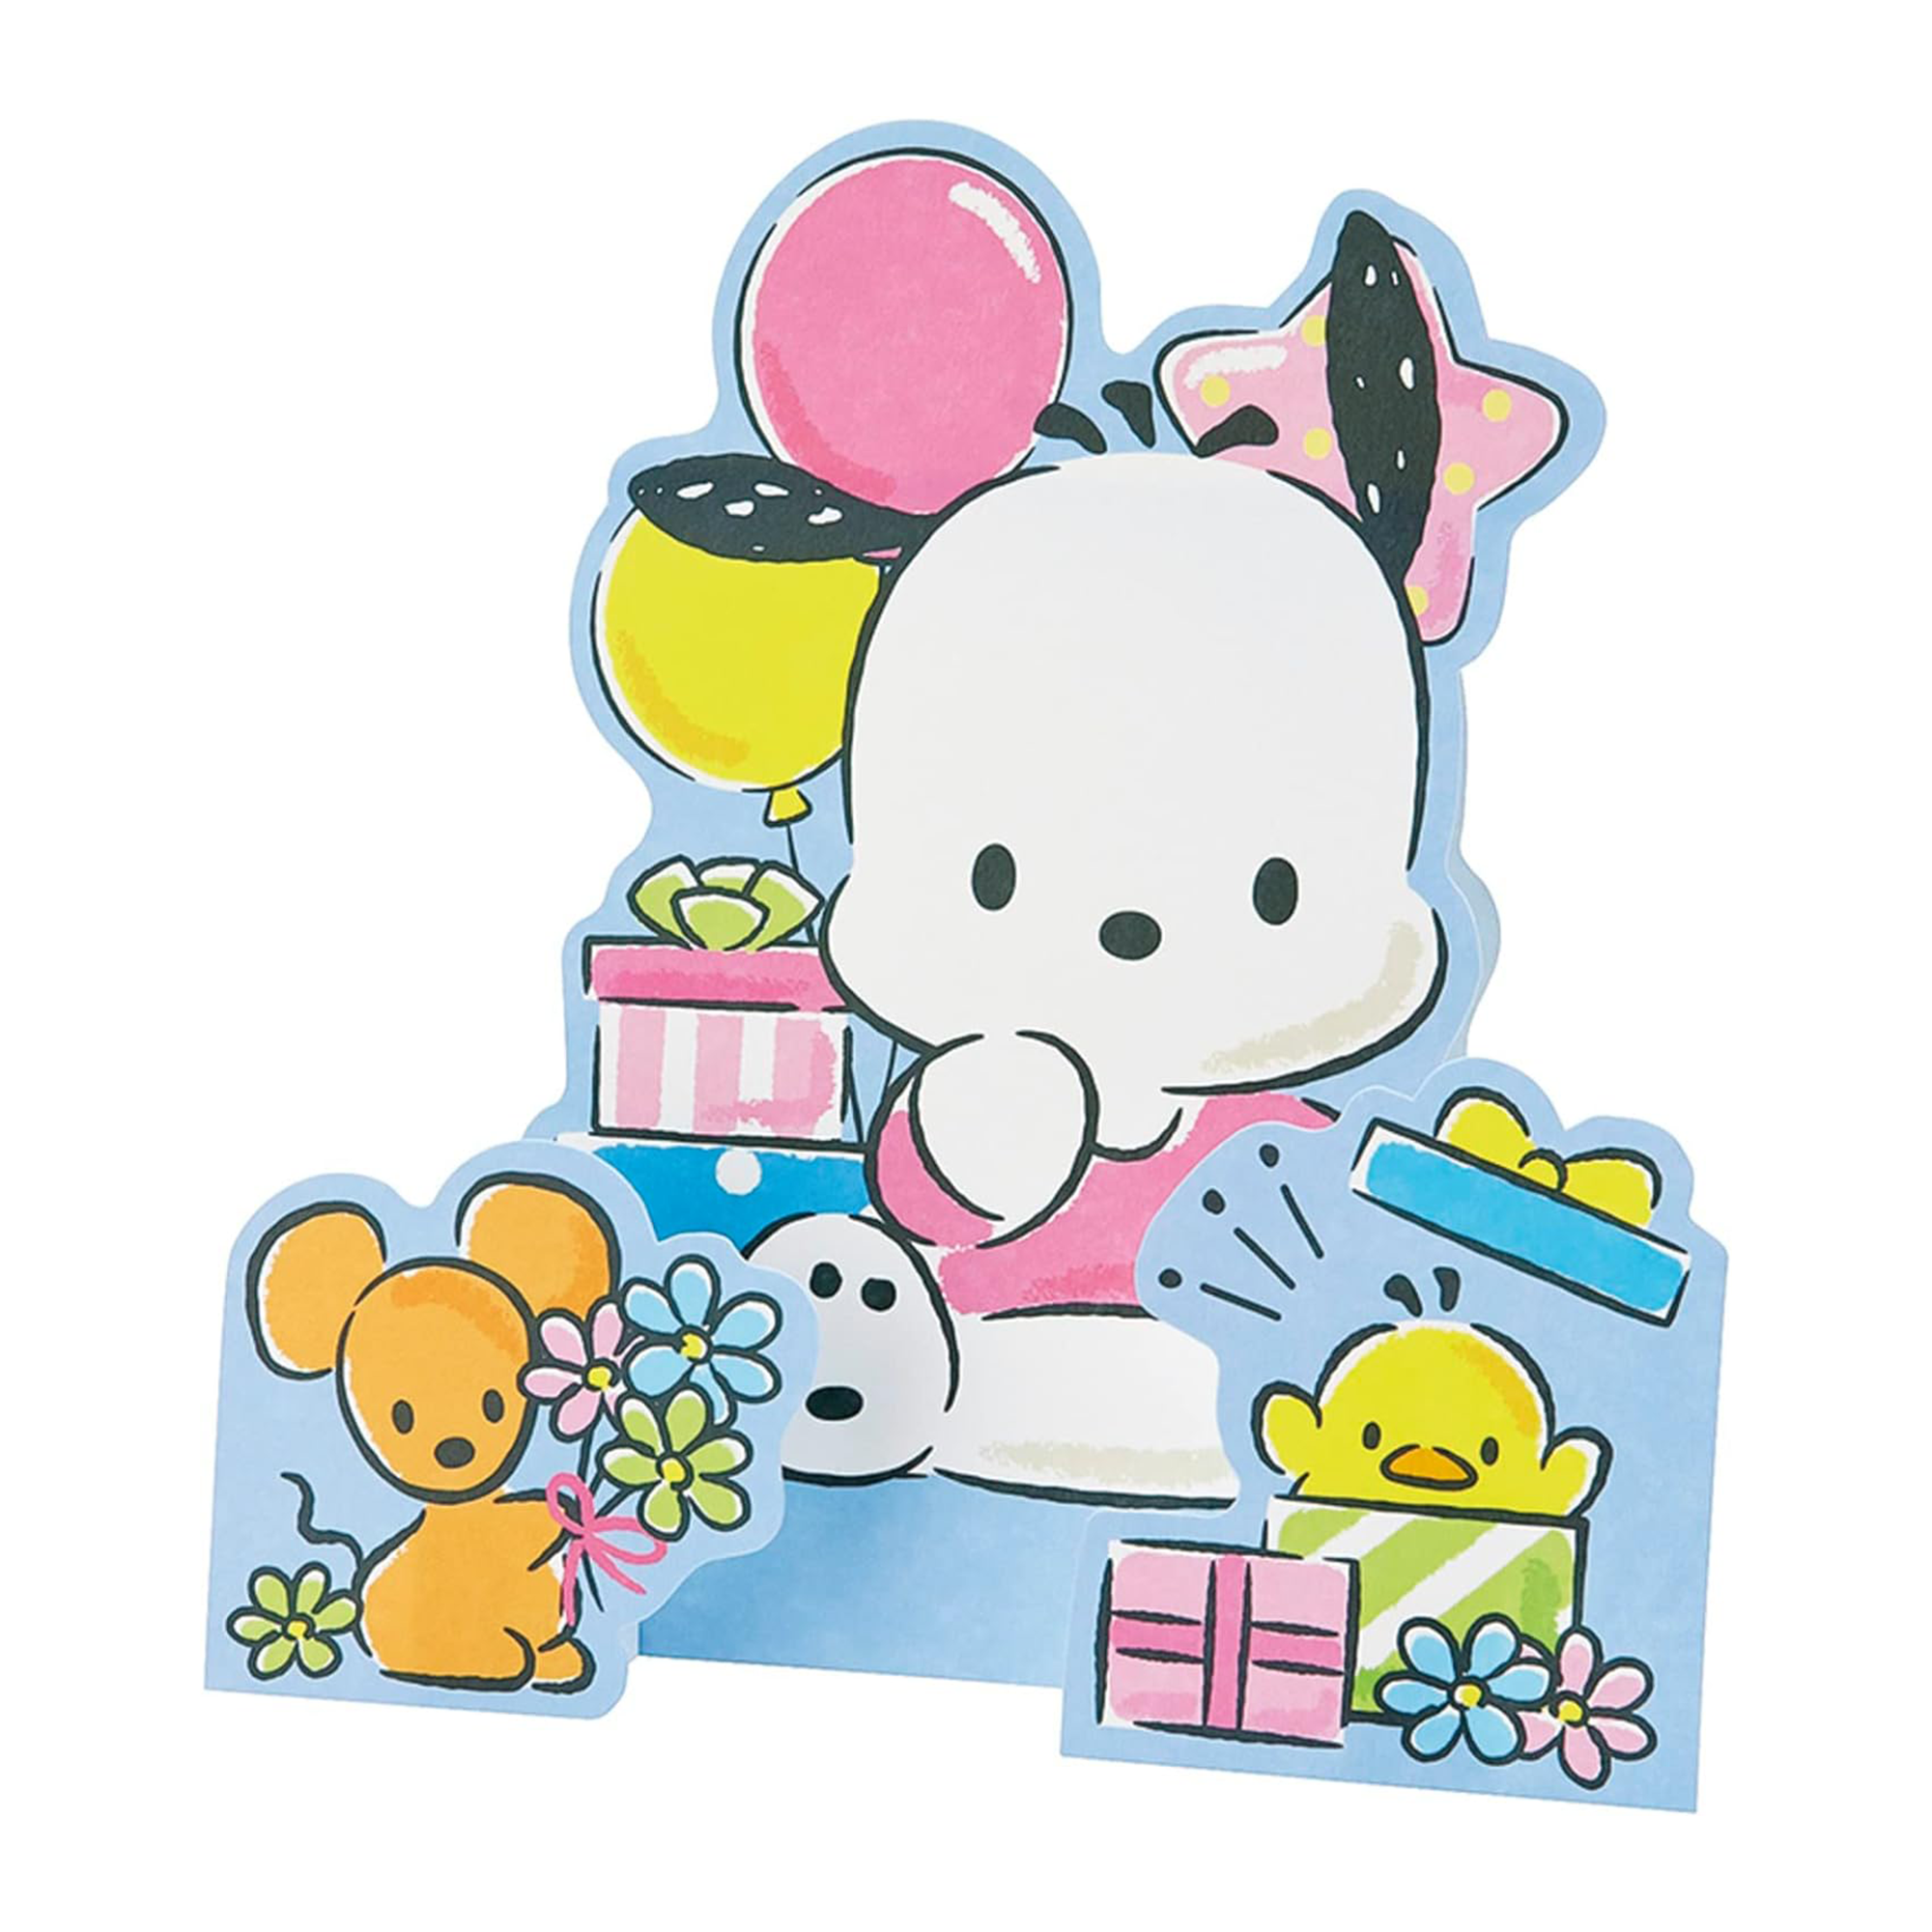 Pochacco Stickers and Greeting Card (Small Gift Series) Stationery Japan Original   